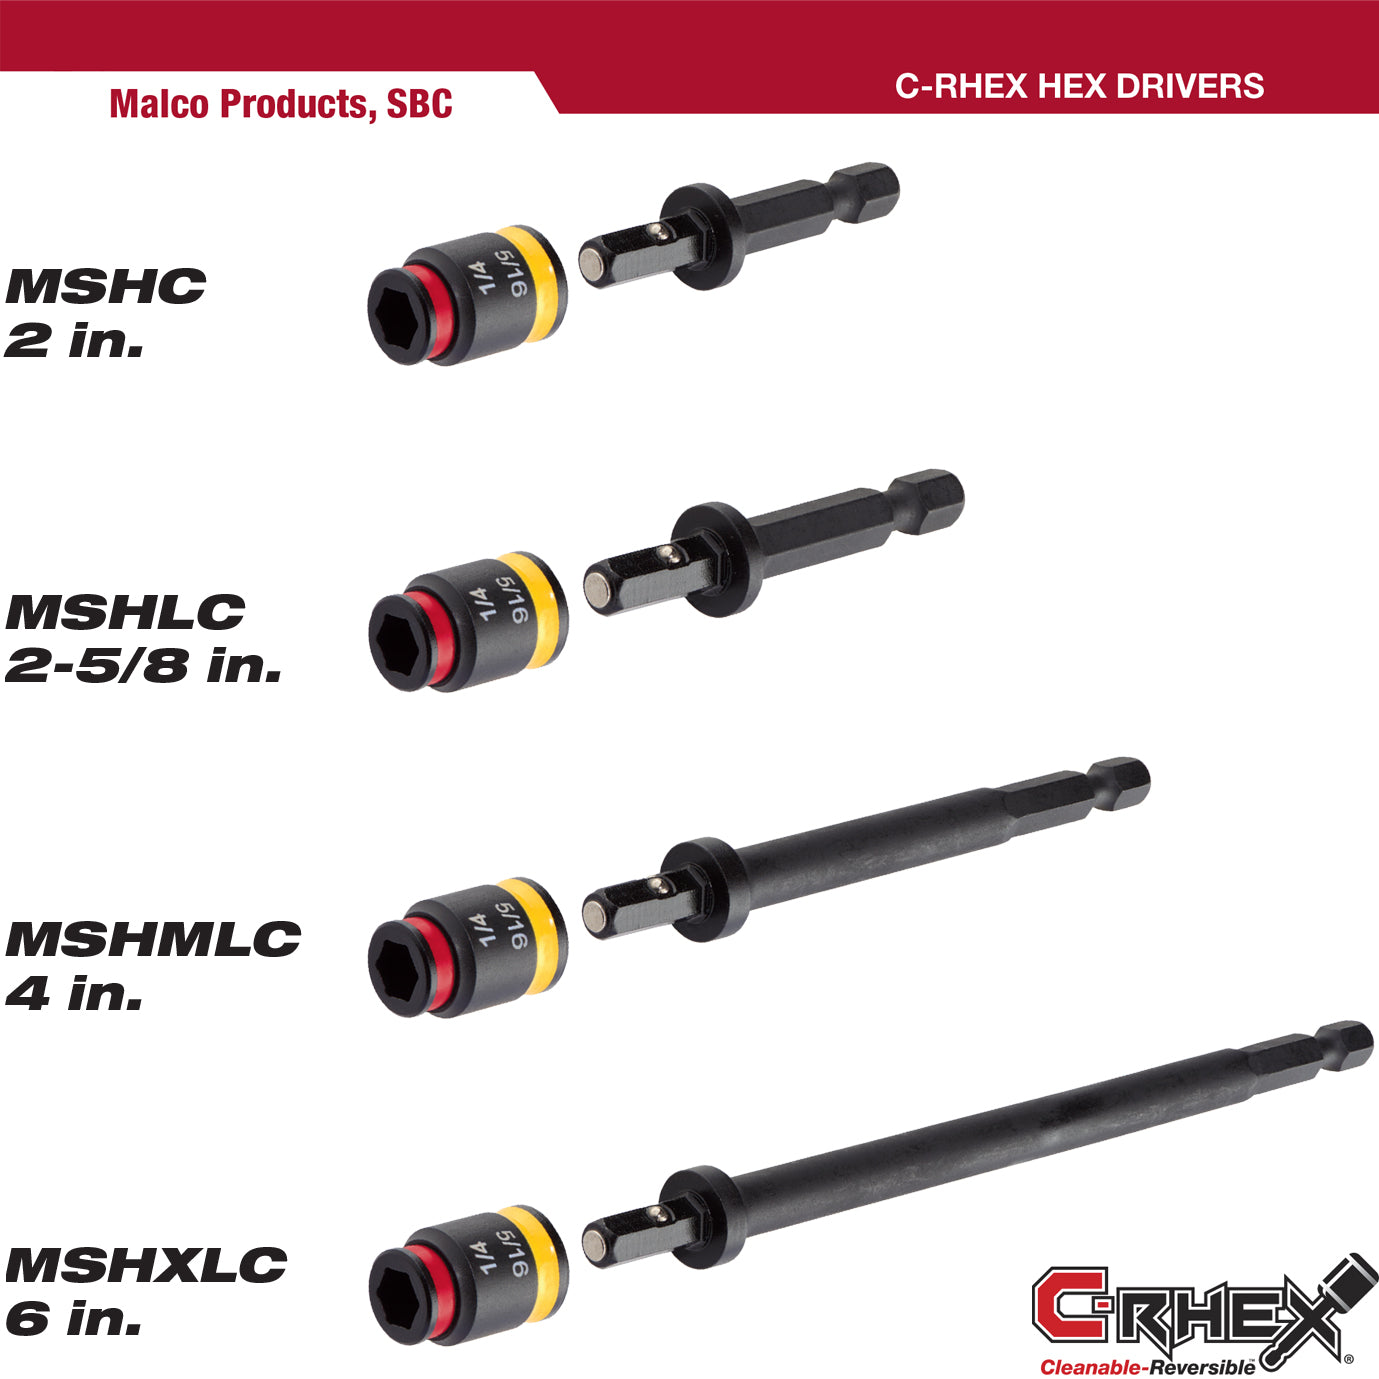 MSHC - C-RHEX Cleanable, Reversible Magnetic Hex Drivers, 1/4" and 5/16", 2" Length